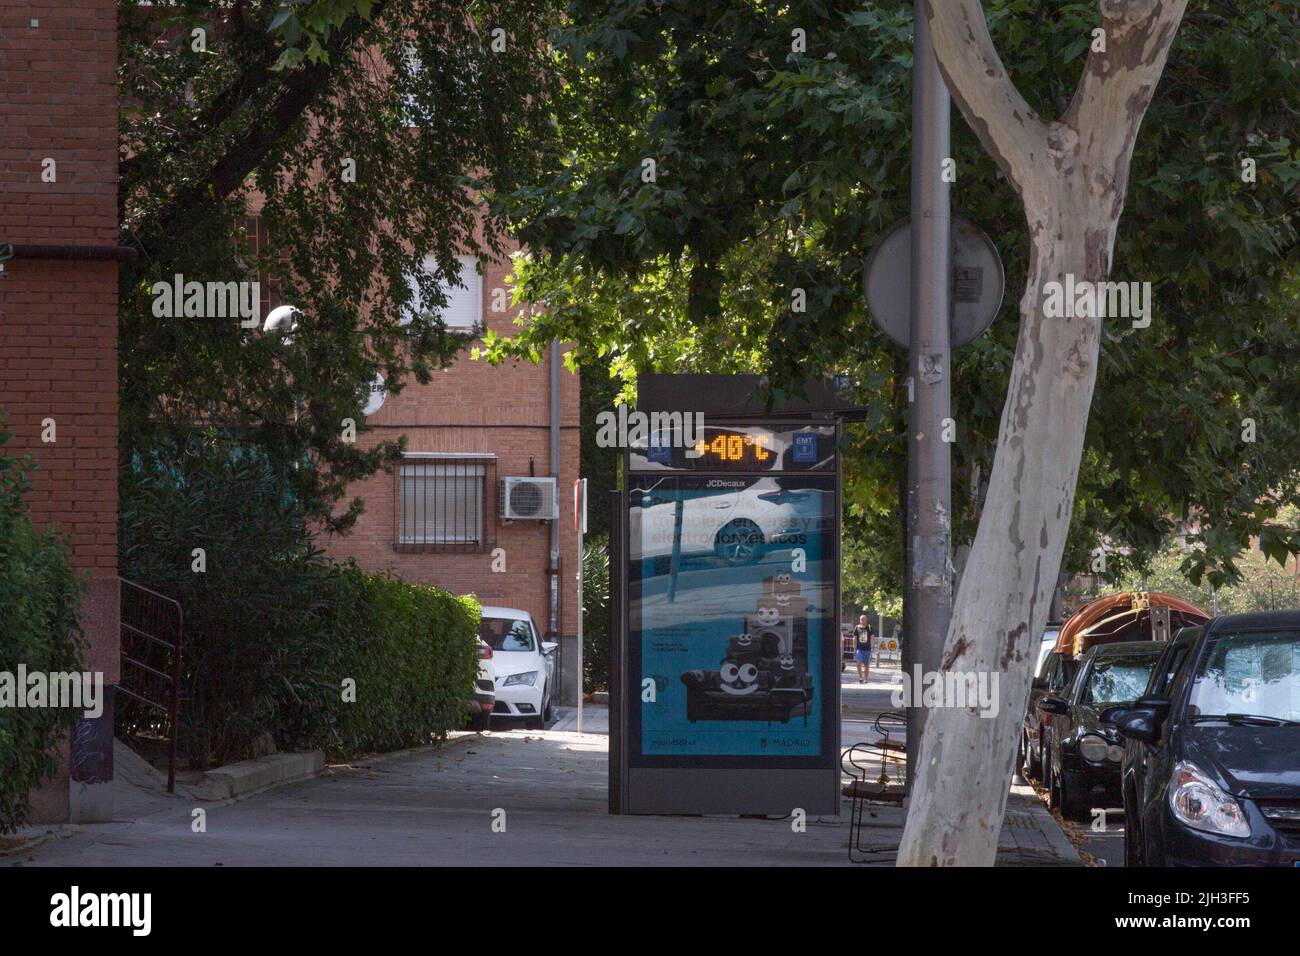 At a bus stop, the thermometer shows 40 degrees Celsius on the street in Madrid. A second heat wave in the summer affects the entire Iberian Peninsula, according to the alert from the State Meteorological Agency (AEMET), a drop in temperatures is expected next Monday, July 18, 2022. The Community of Madrid maintains the orange level for highs of 40-41 degrees Celsius. Stock Photo